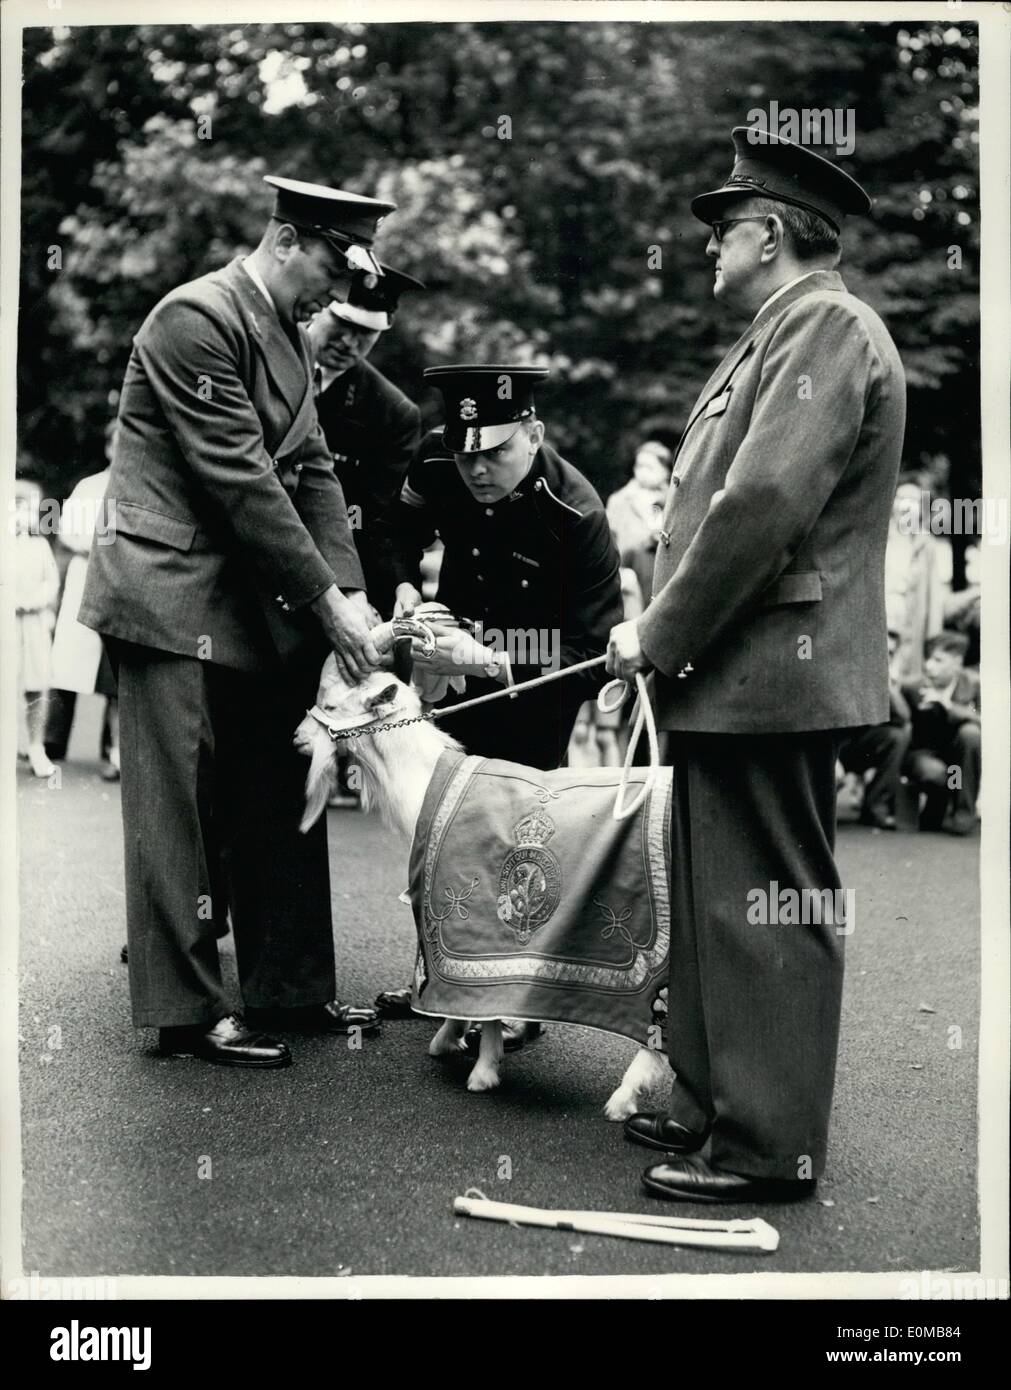 Jul. 07, 1954 - Zoo goat becomes new mascot of the welsh regiment handing over ceremony at the London zoo. Taffy the tenth, a young goat from the London zoo, was handed over to goat major John Tullet to become the new regimental mascot of the first Battalion the welch regiment. His predecessor died last year while serving with the battalion in hone Kong. Fot today's occasion, goat major tullet has come all the way from Hong Kong, where the regiment now is to collect Taffy and instruct him in his regimental duties before the regiment returns to Britain at the end of the year Stock Photo